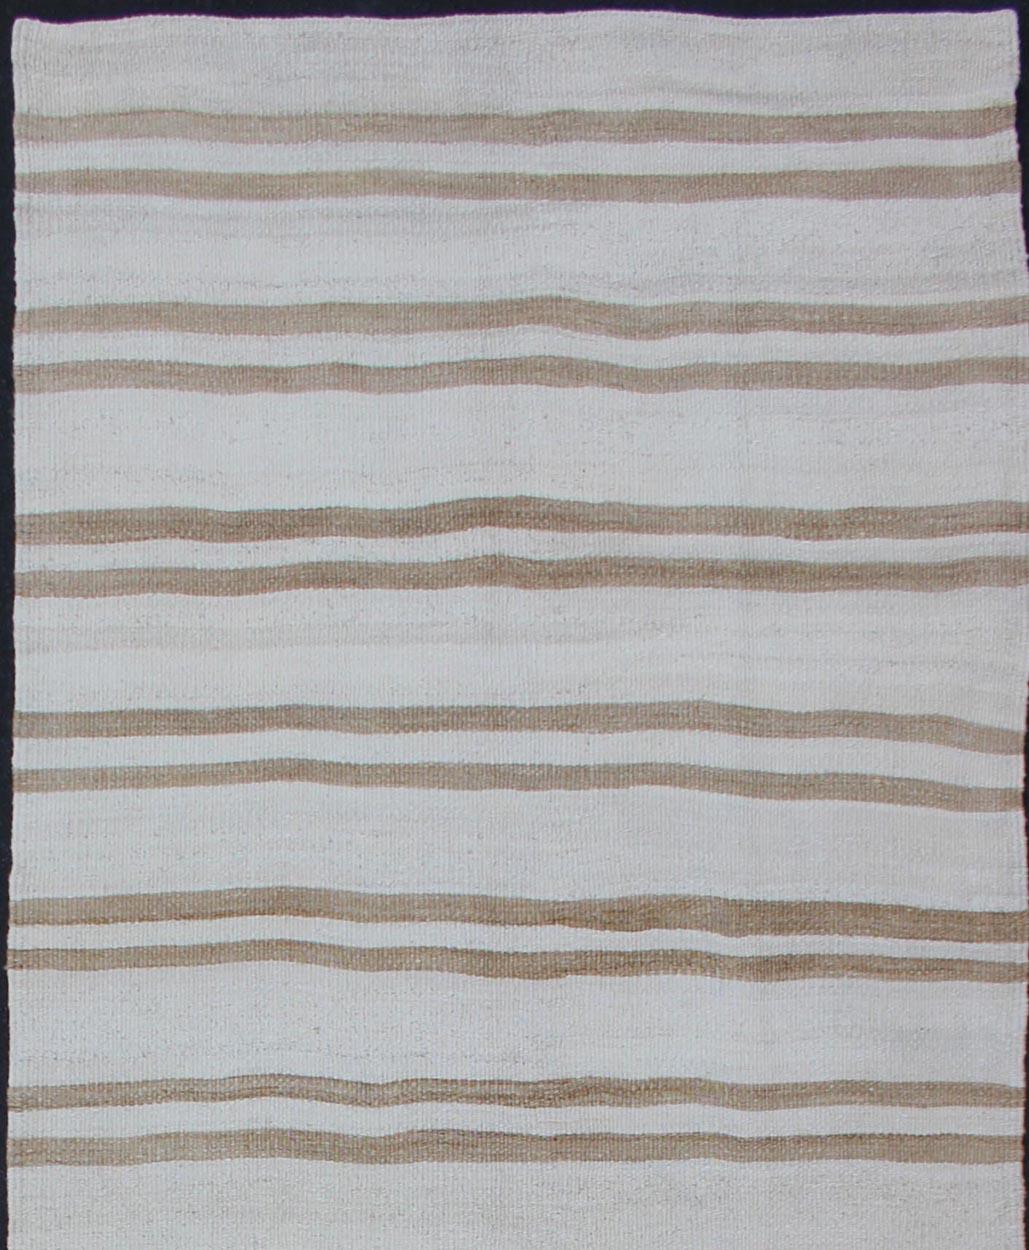 Stripe design Kilim runner in cream and taupe, Keivan Woven Arts / rug en-165951, country of origin / type: Turkey / Kilim, circa 1950

This flat-woven Kilim runner from Turkey features an exciting composition consisting of stripes rendered in